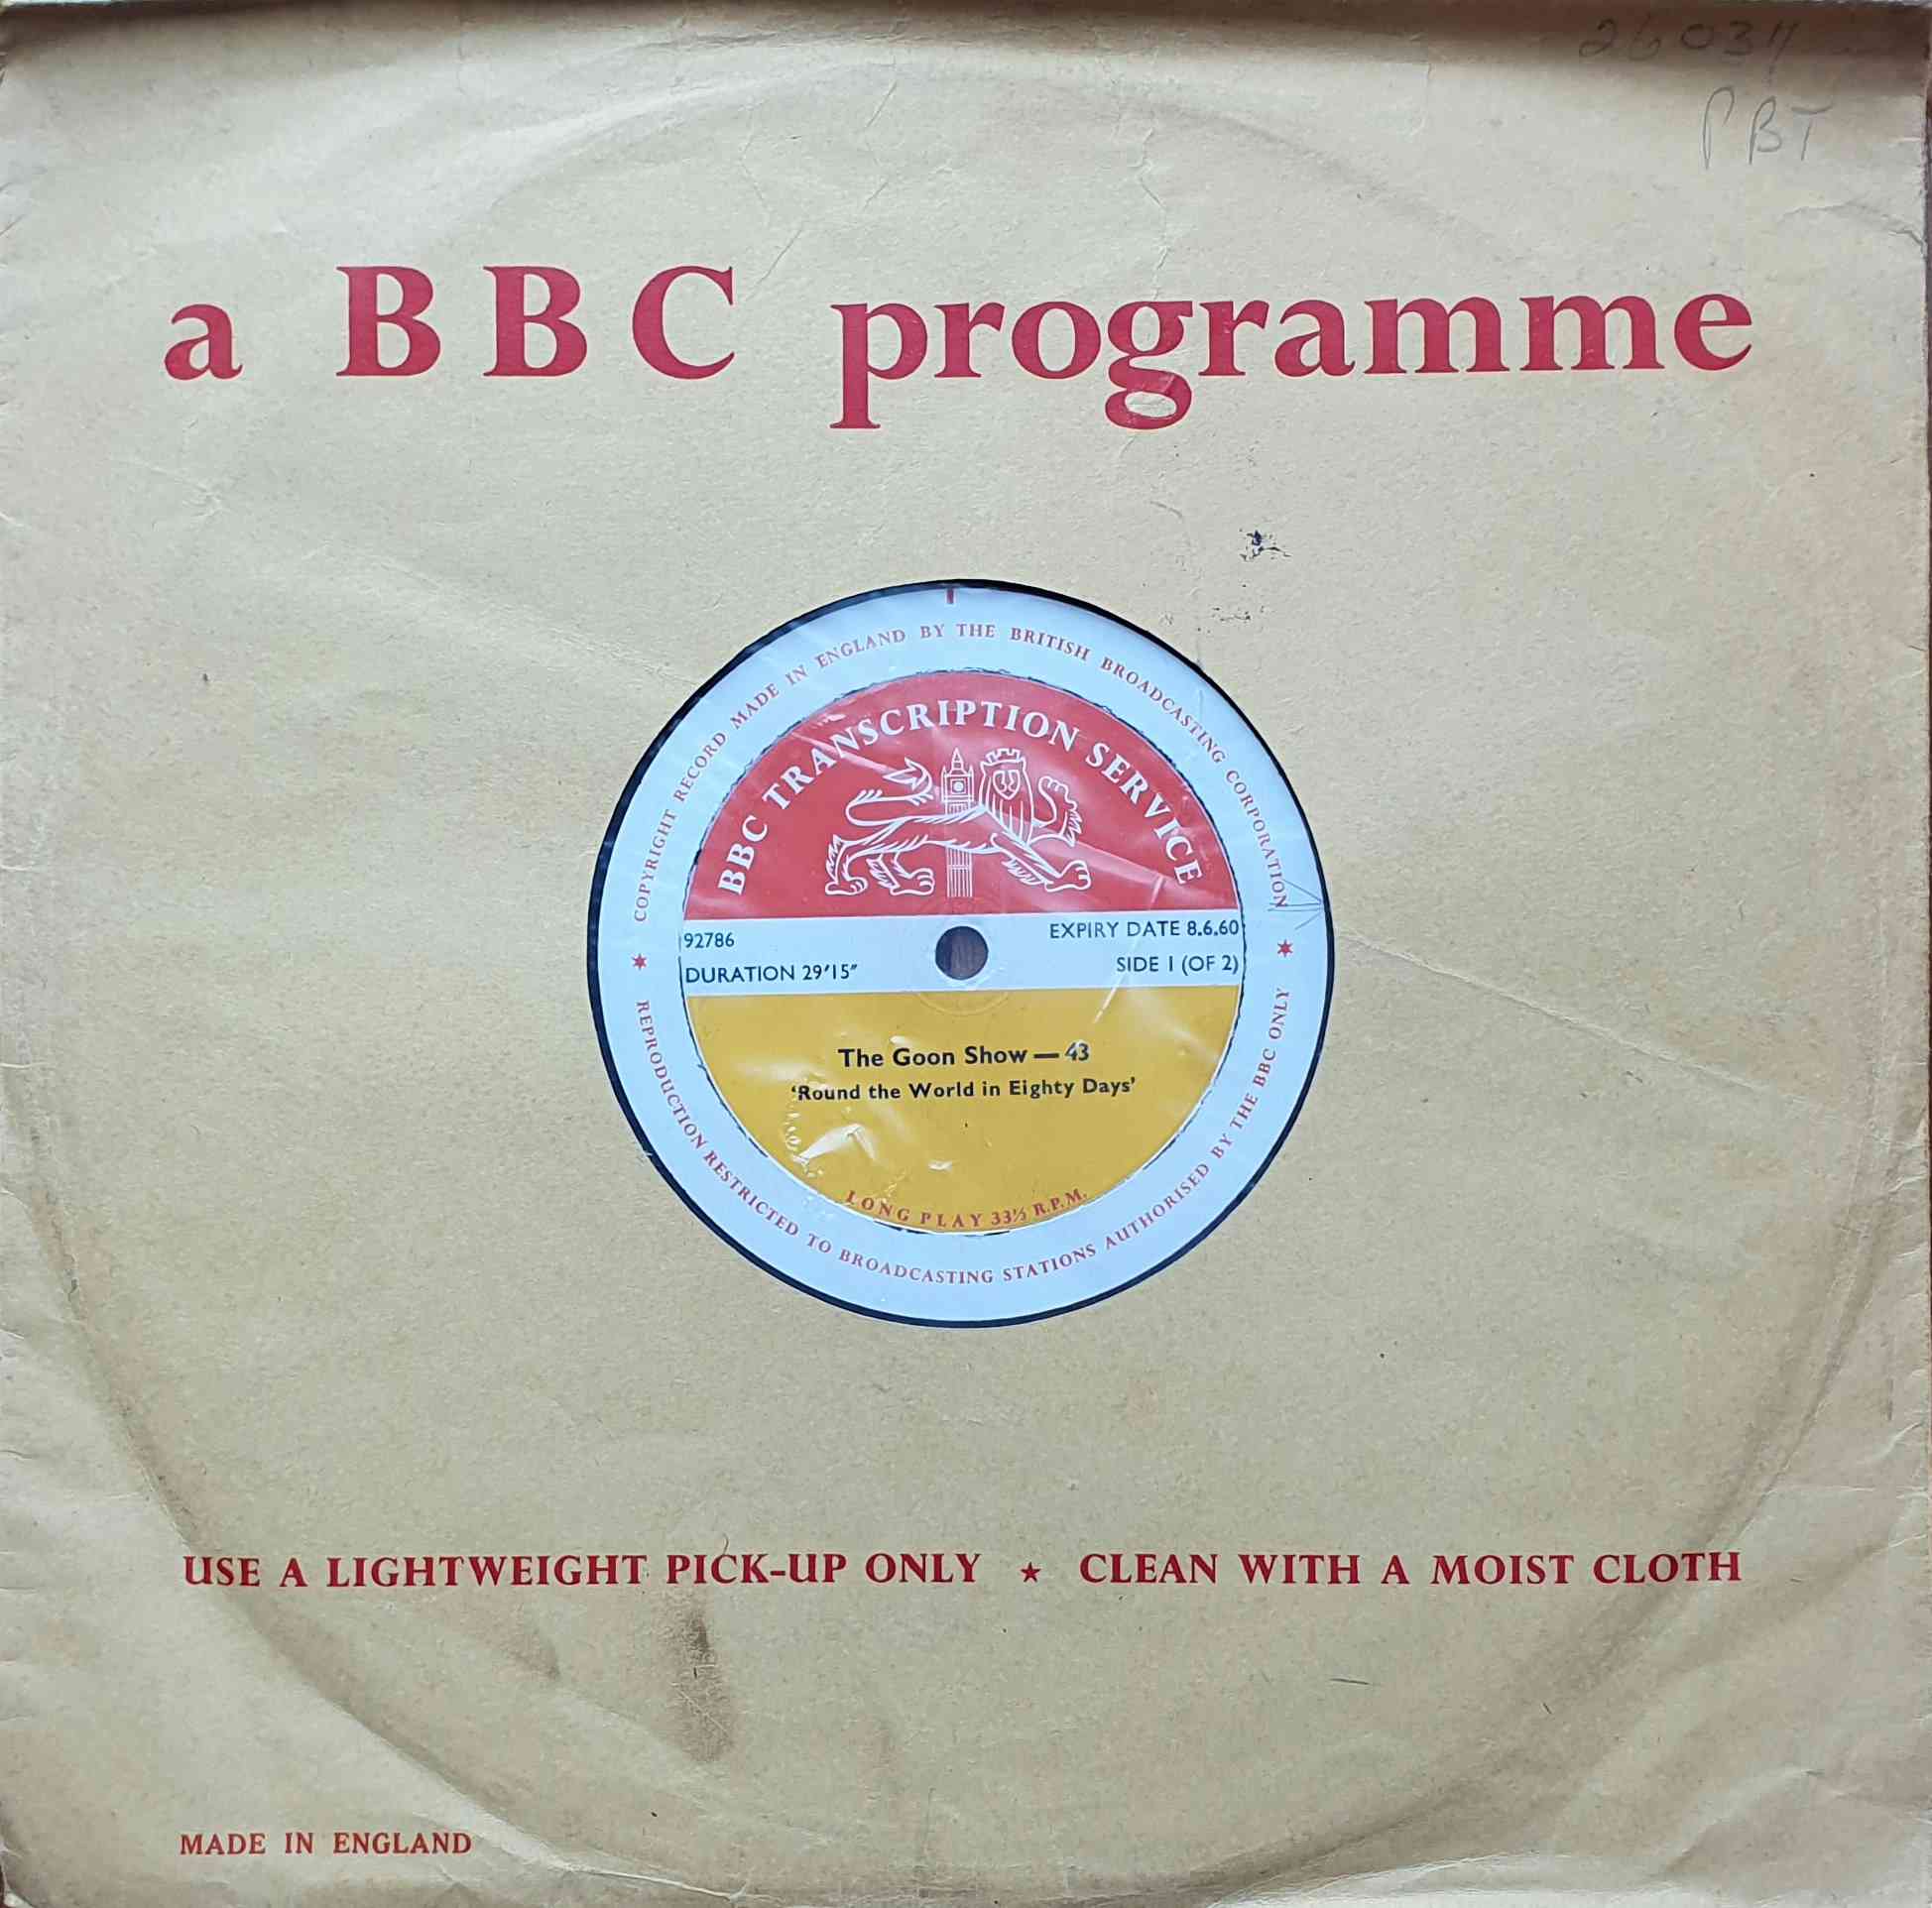 Picture of 92786 The Goon Show - 43 / 44 (Side 1 of 2) by artist Unknown from the BBC 10inches - Records and Tapes library